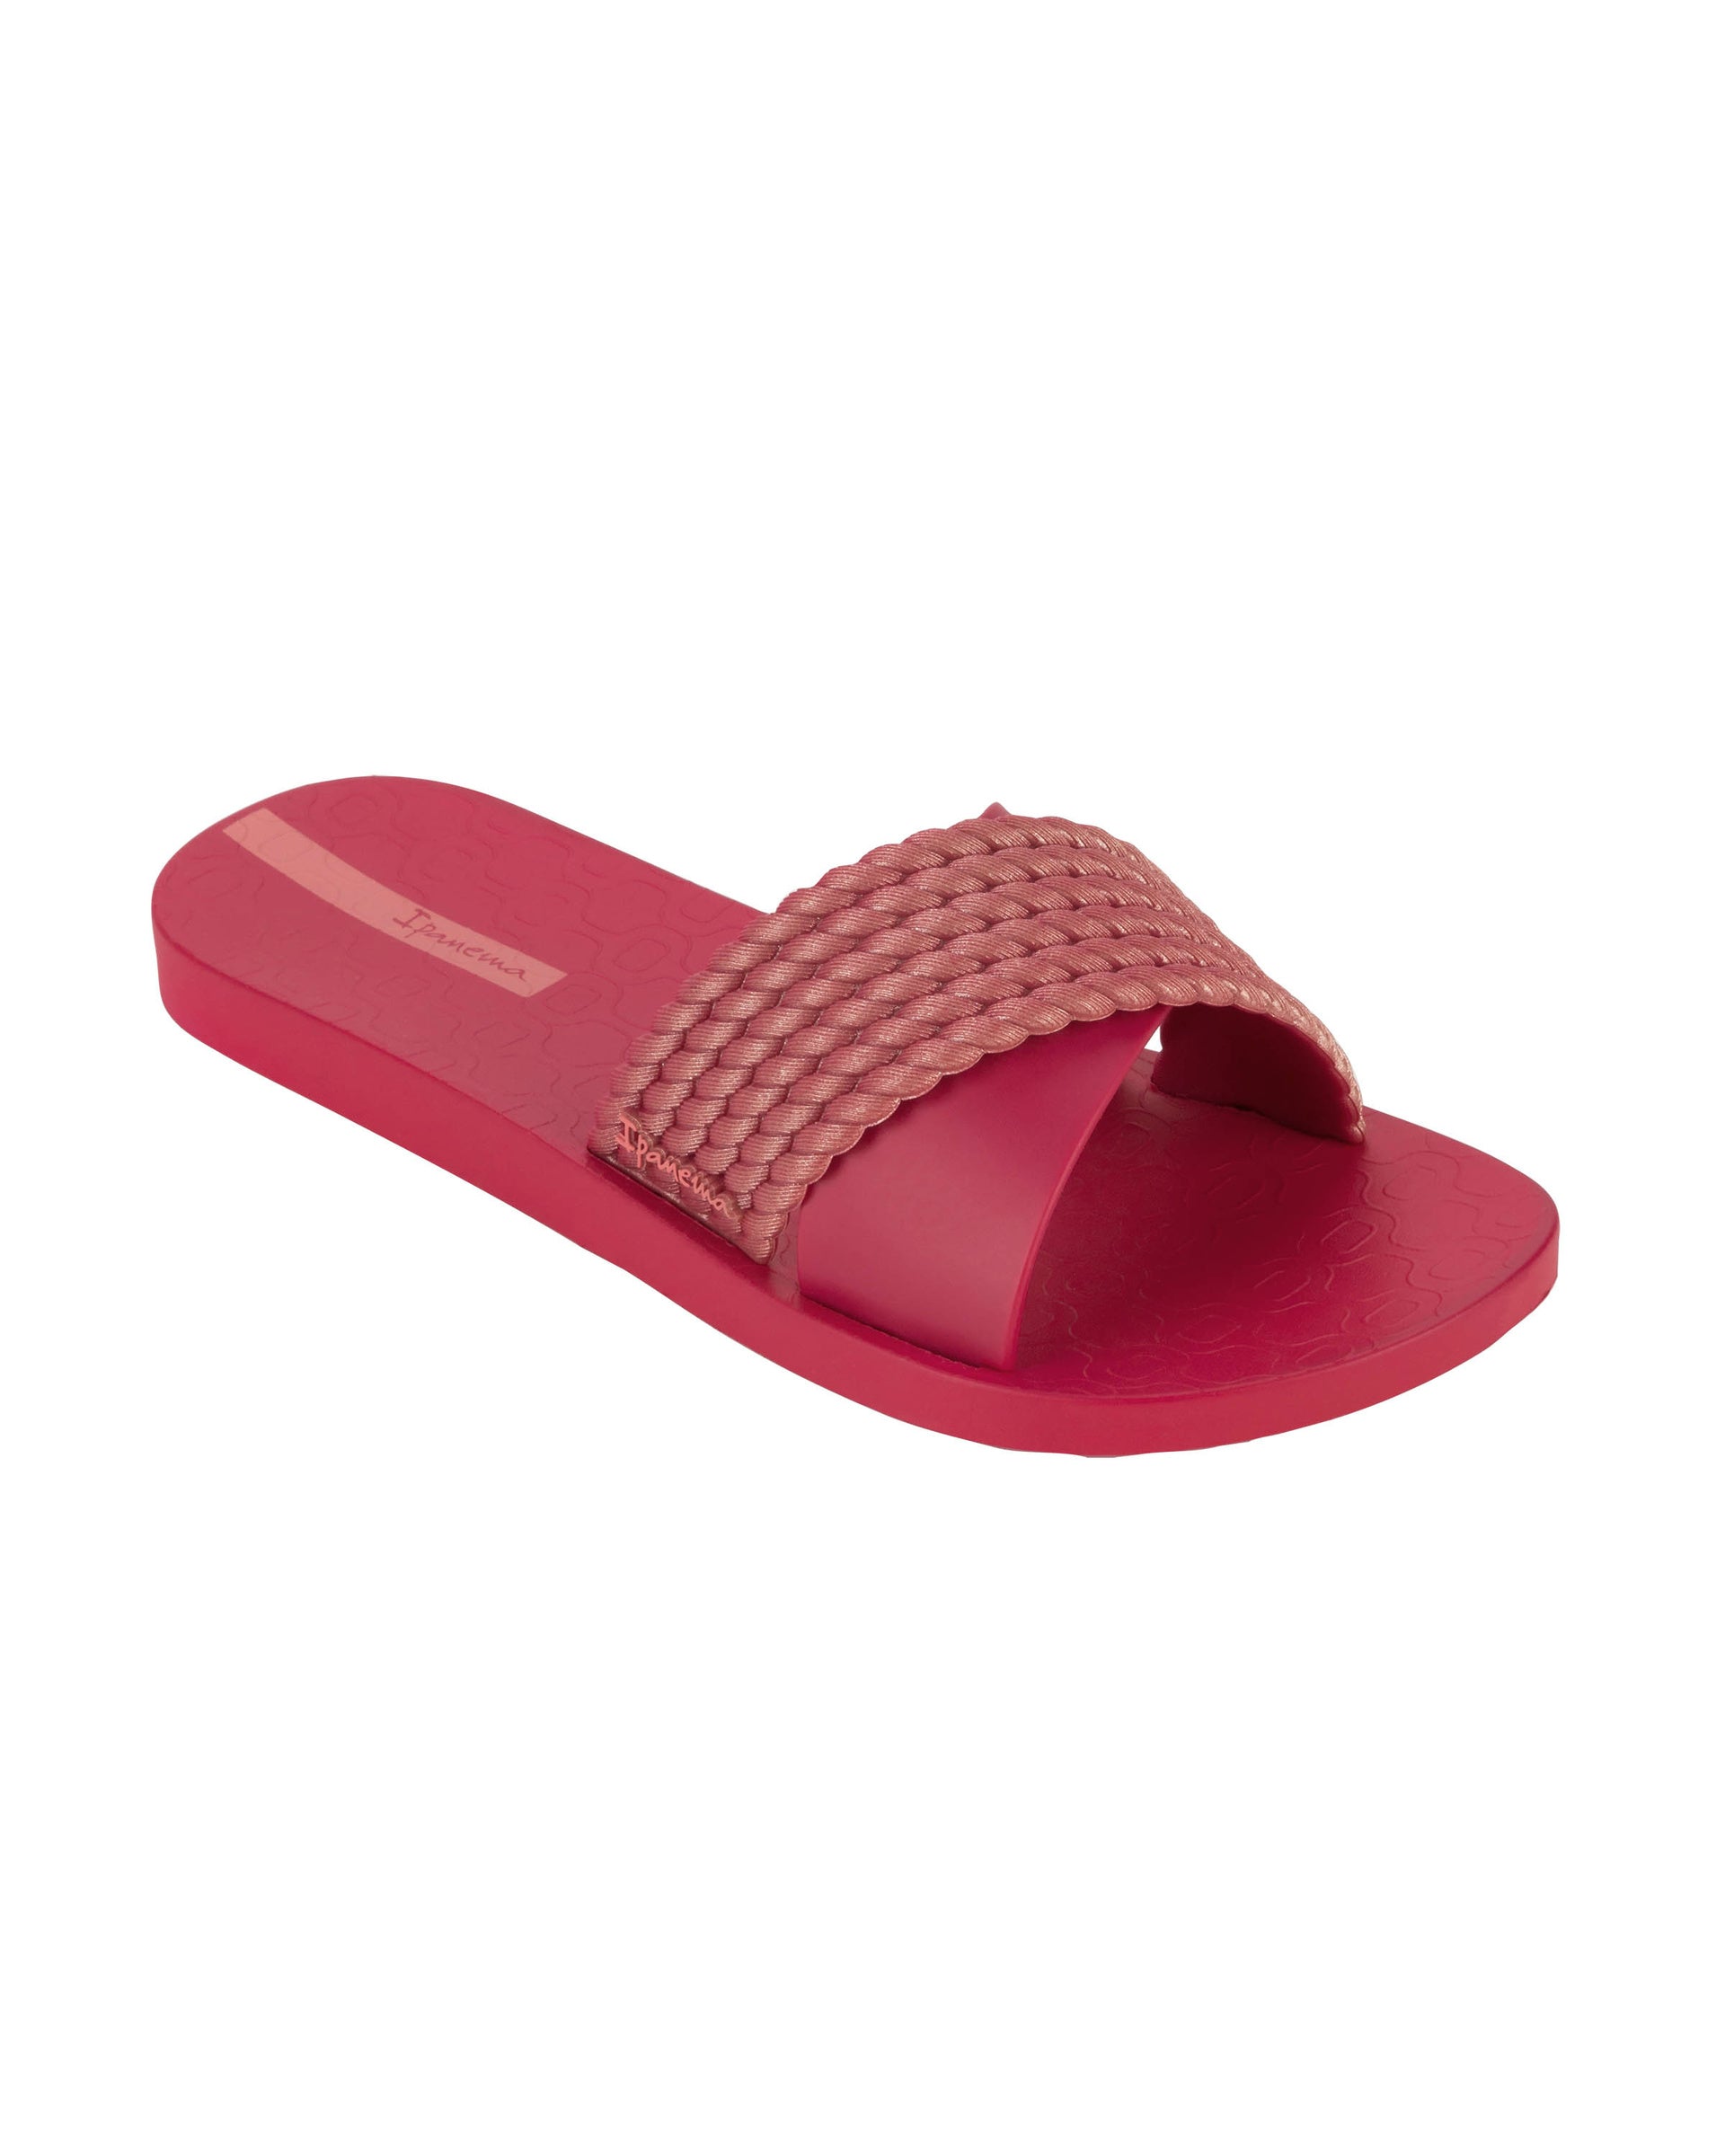 Angled view of a red Ipanema Street women's slide.